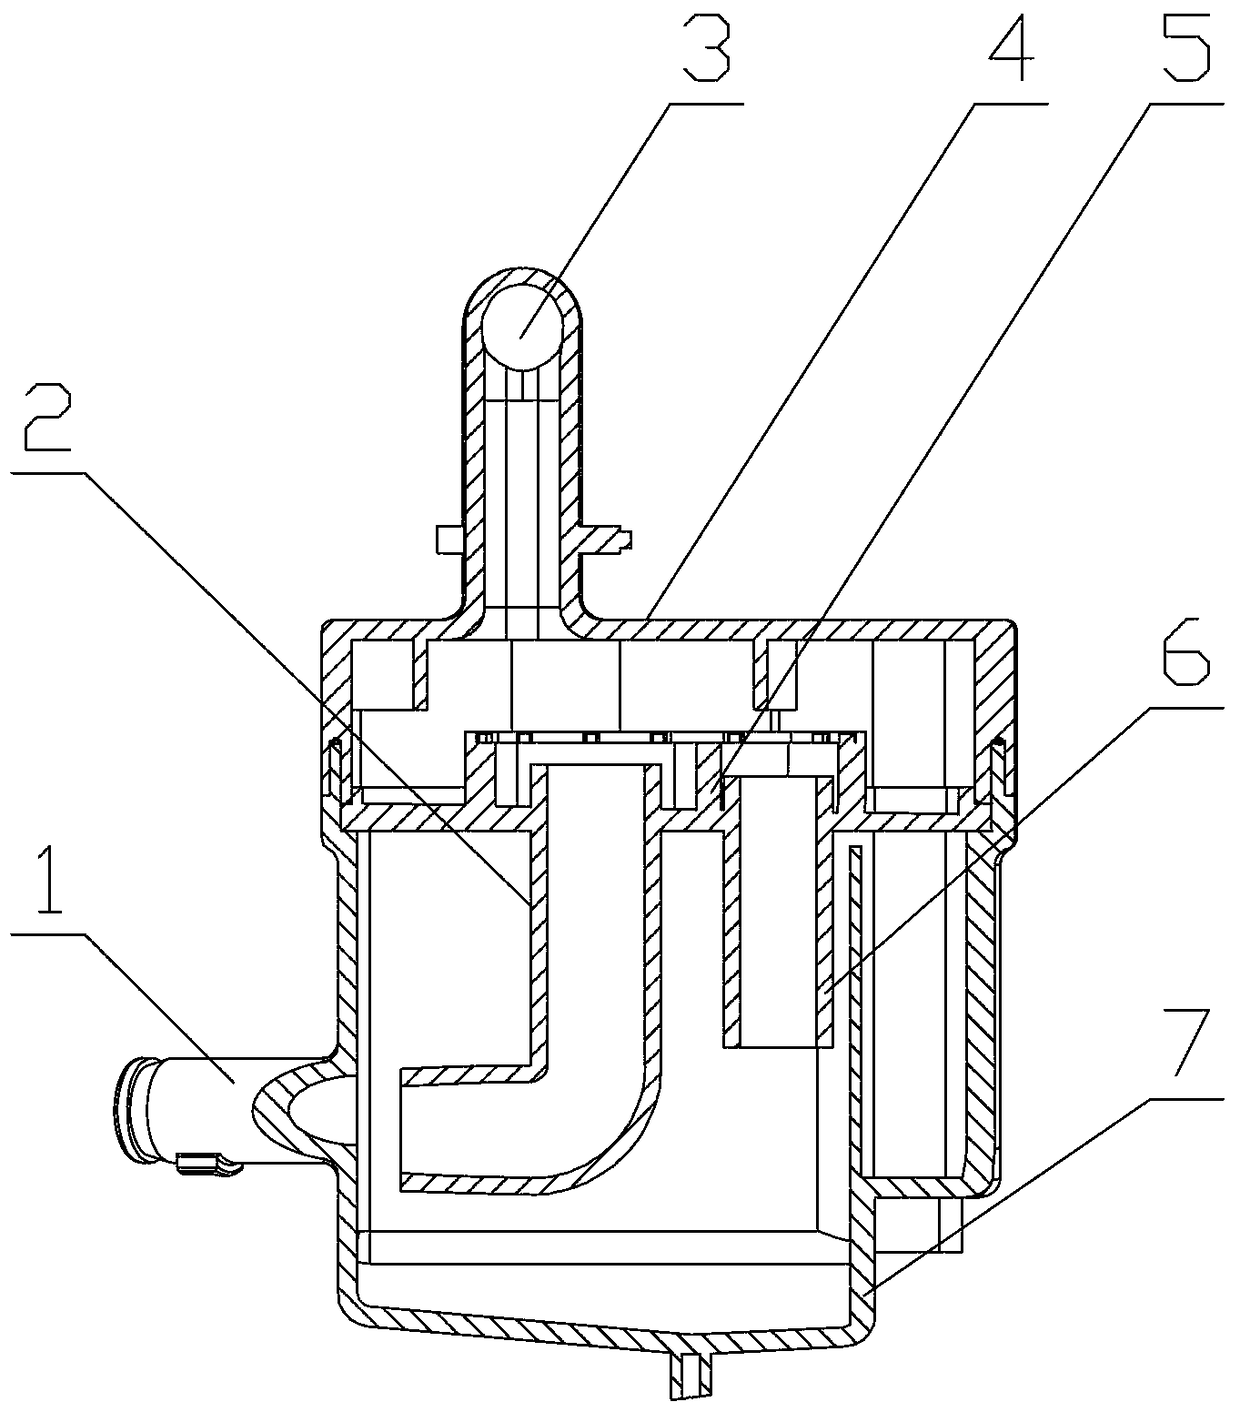 Multi-channel air suction mute cavity